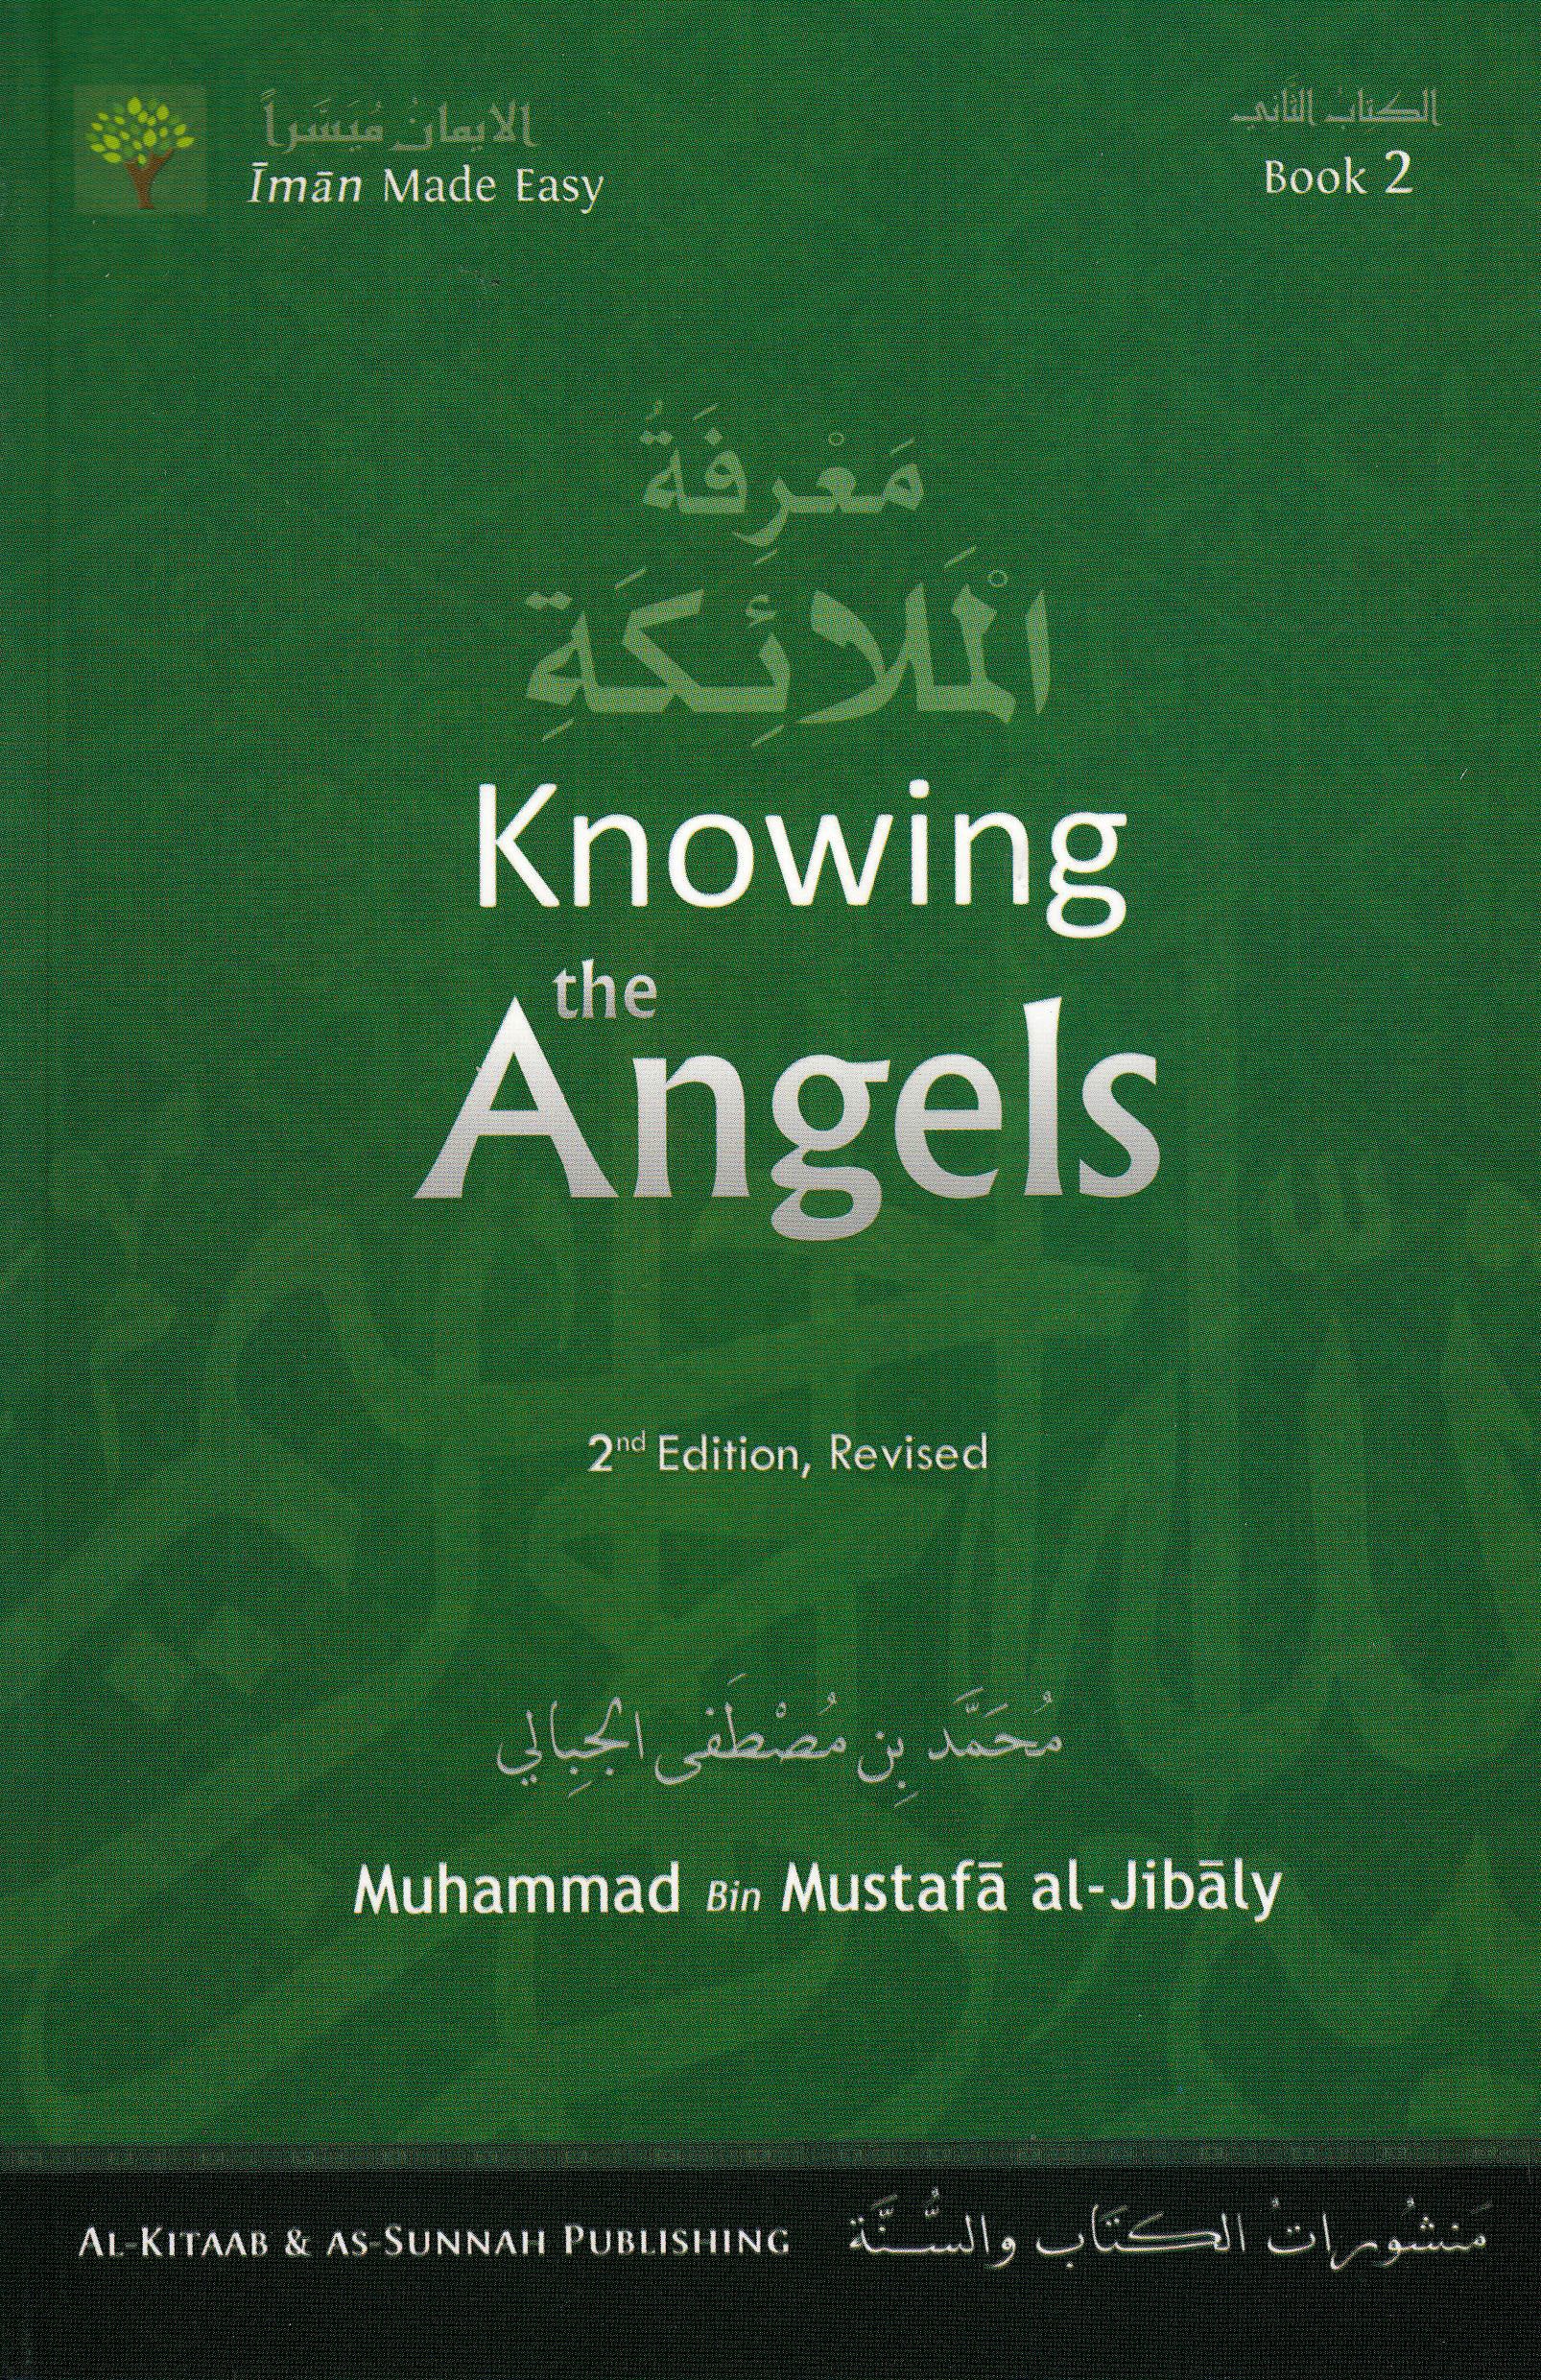 Knowing the Angels